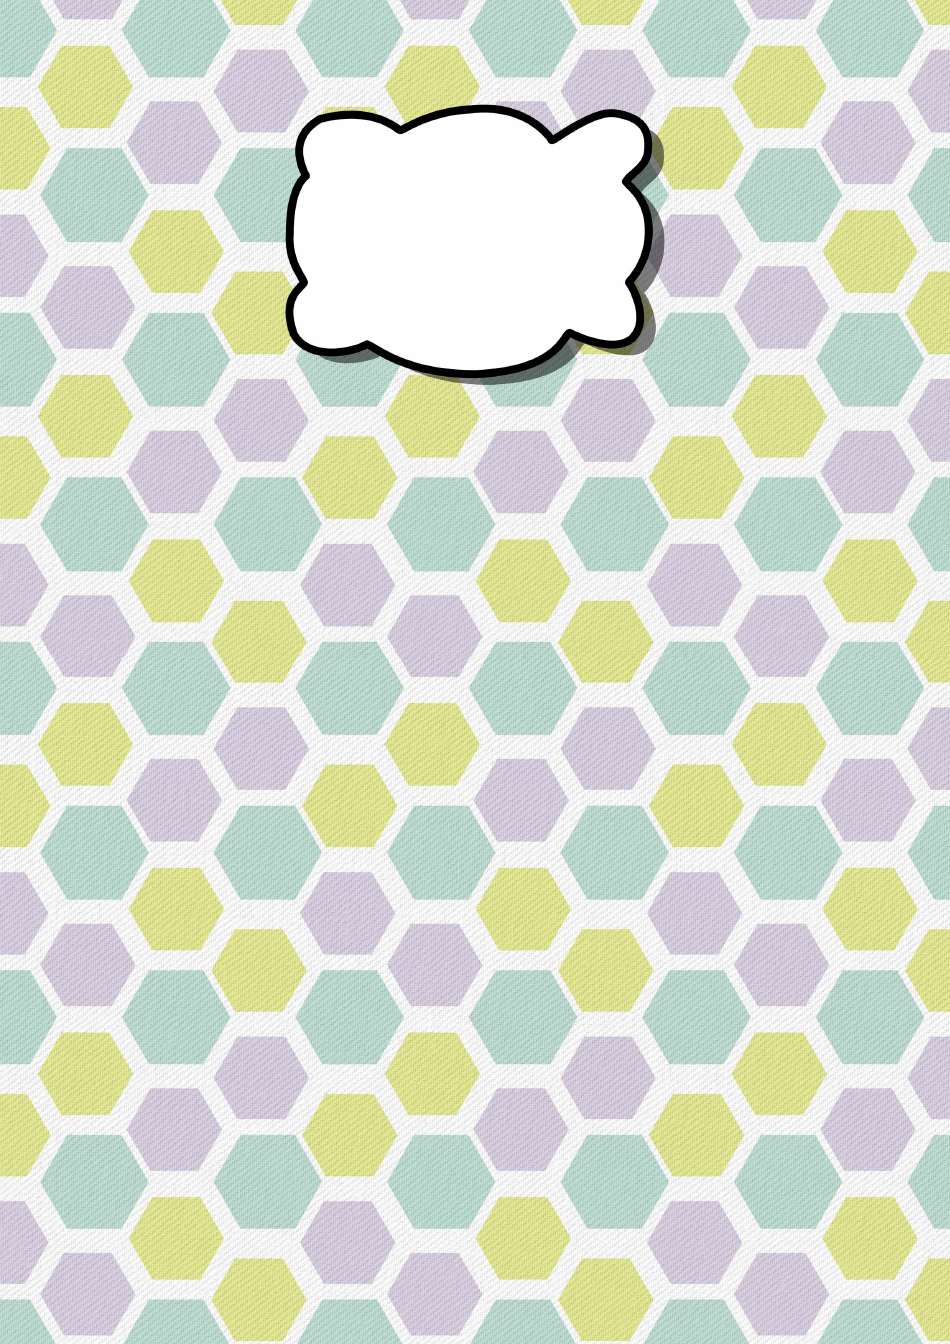 Hexagonal Binder Cover Template, Page 1